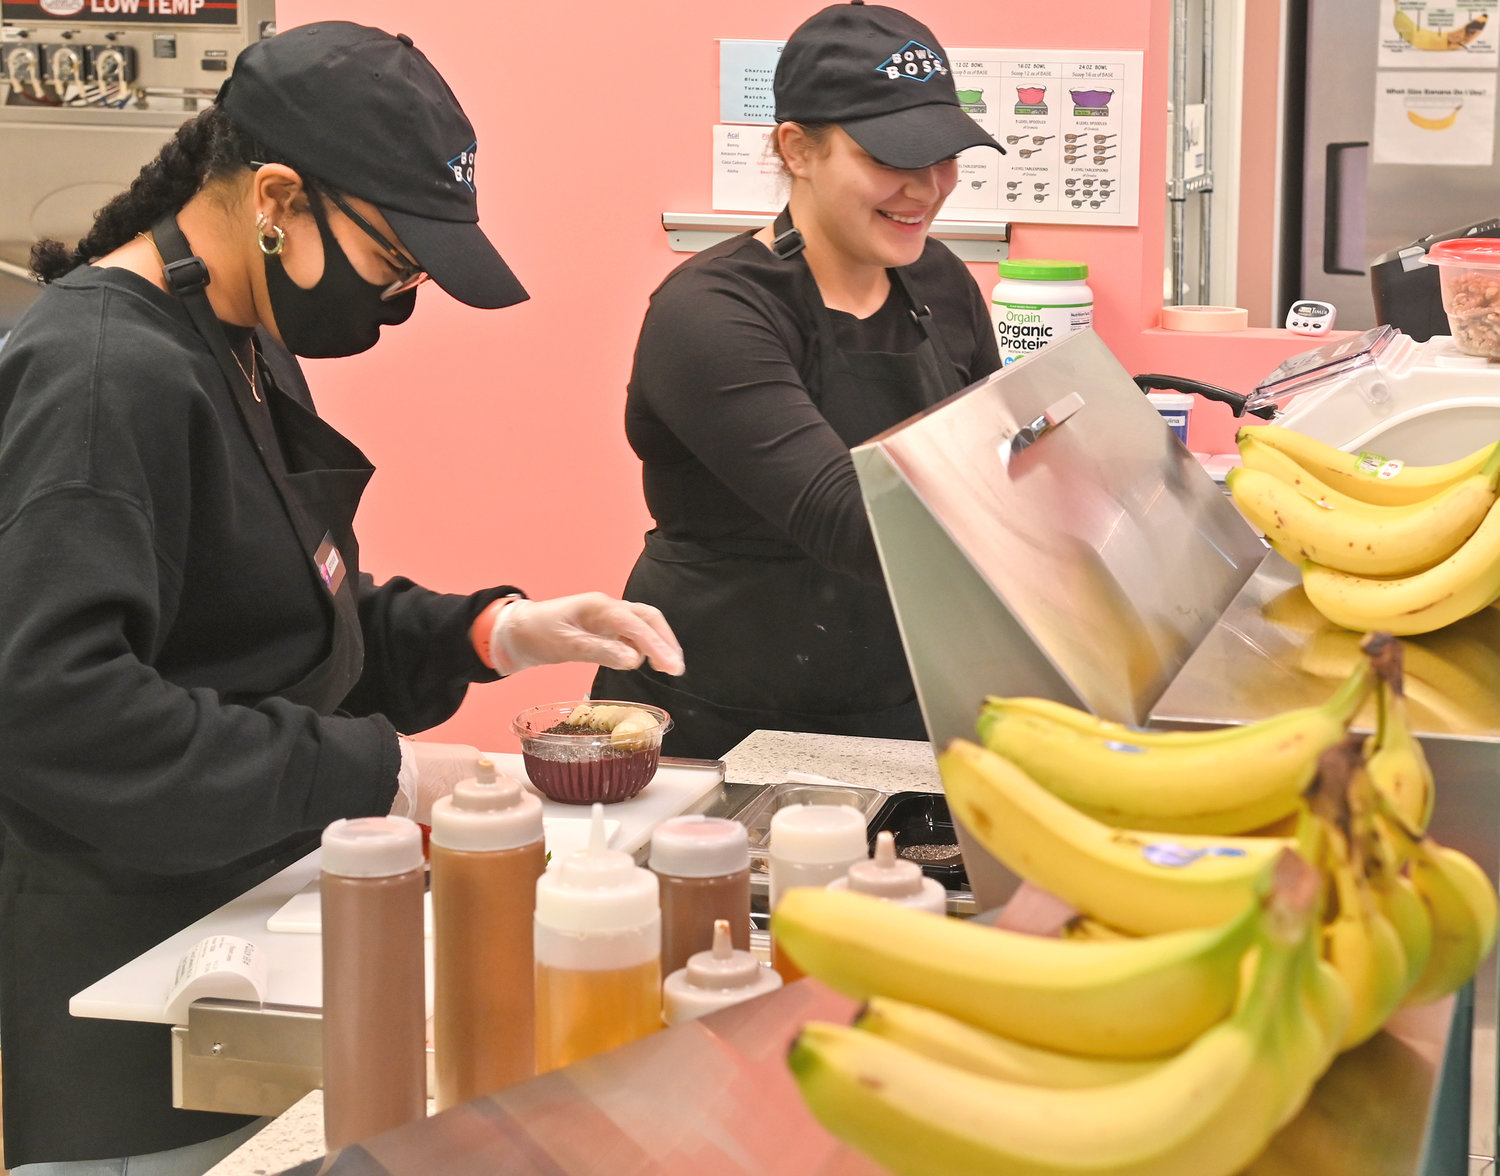 BOWLISTA IN ACTION — Bowl Boss “Bowlistas” Ishmarai Hamid, left, and Alana Preski prepare a Coco Cabana bowl at the restuarant, located at 86 Hangar Road on the first floor of the Air City Lofts complex earlier this week. The business specializes in a variety of fruit bowls. For hours, and other information,visit its page on Facebook.